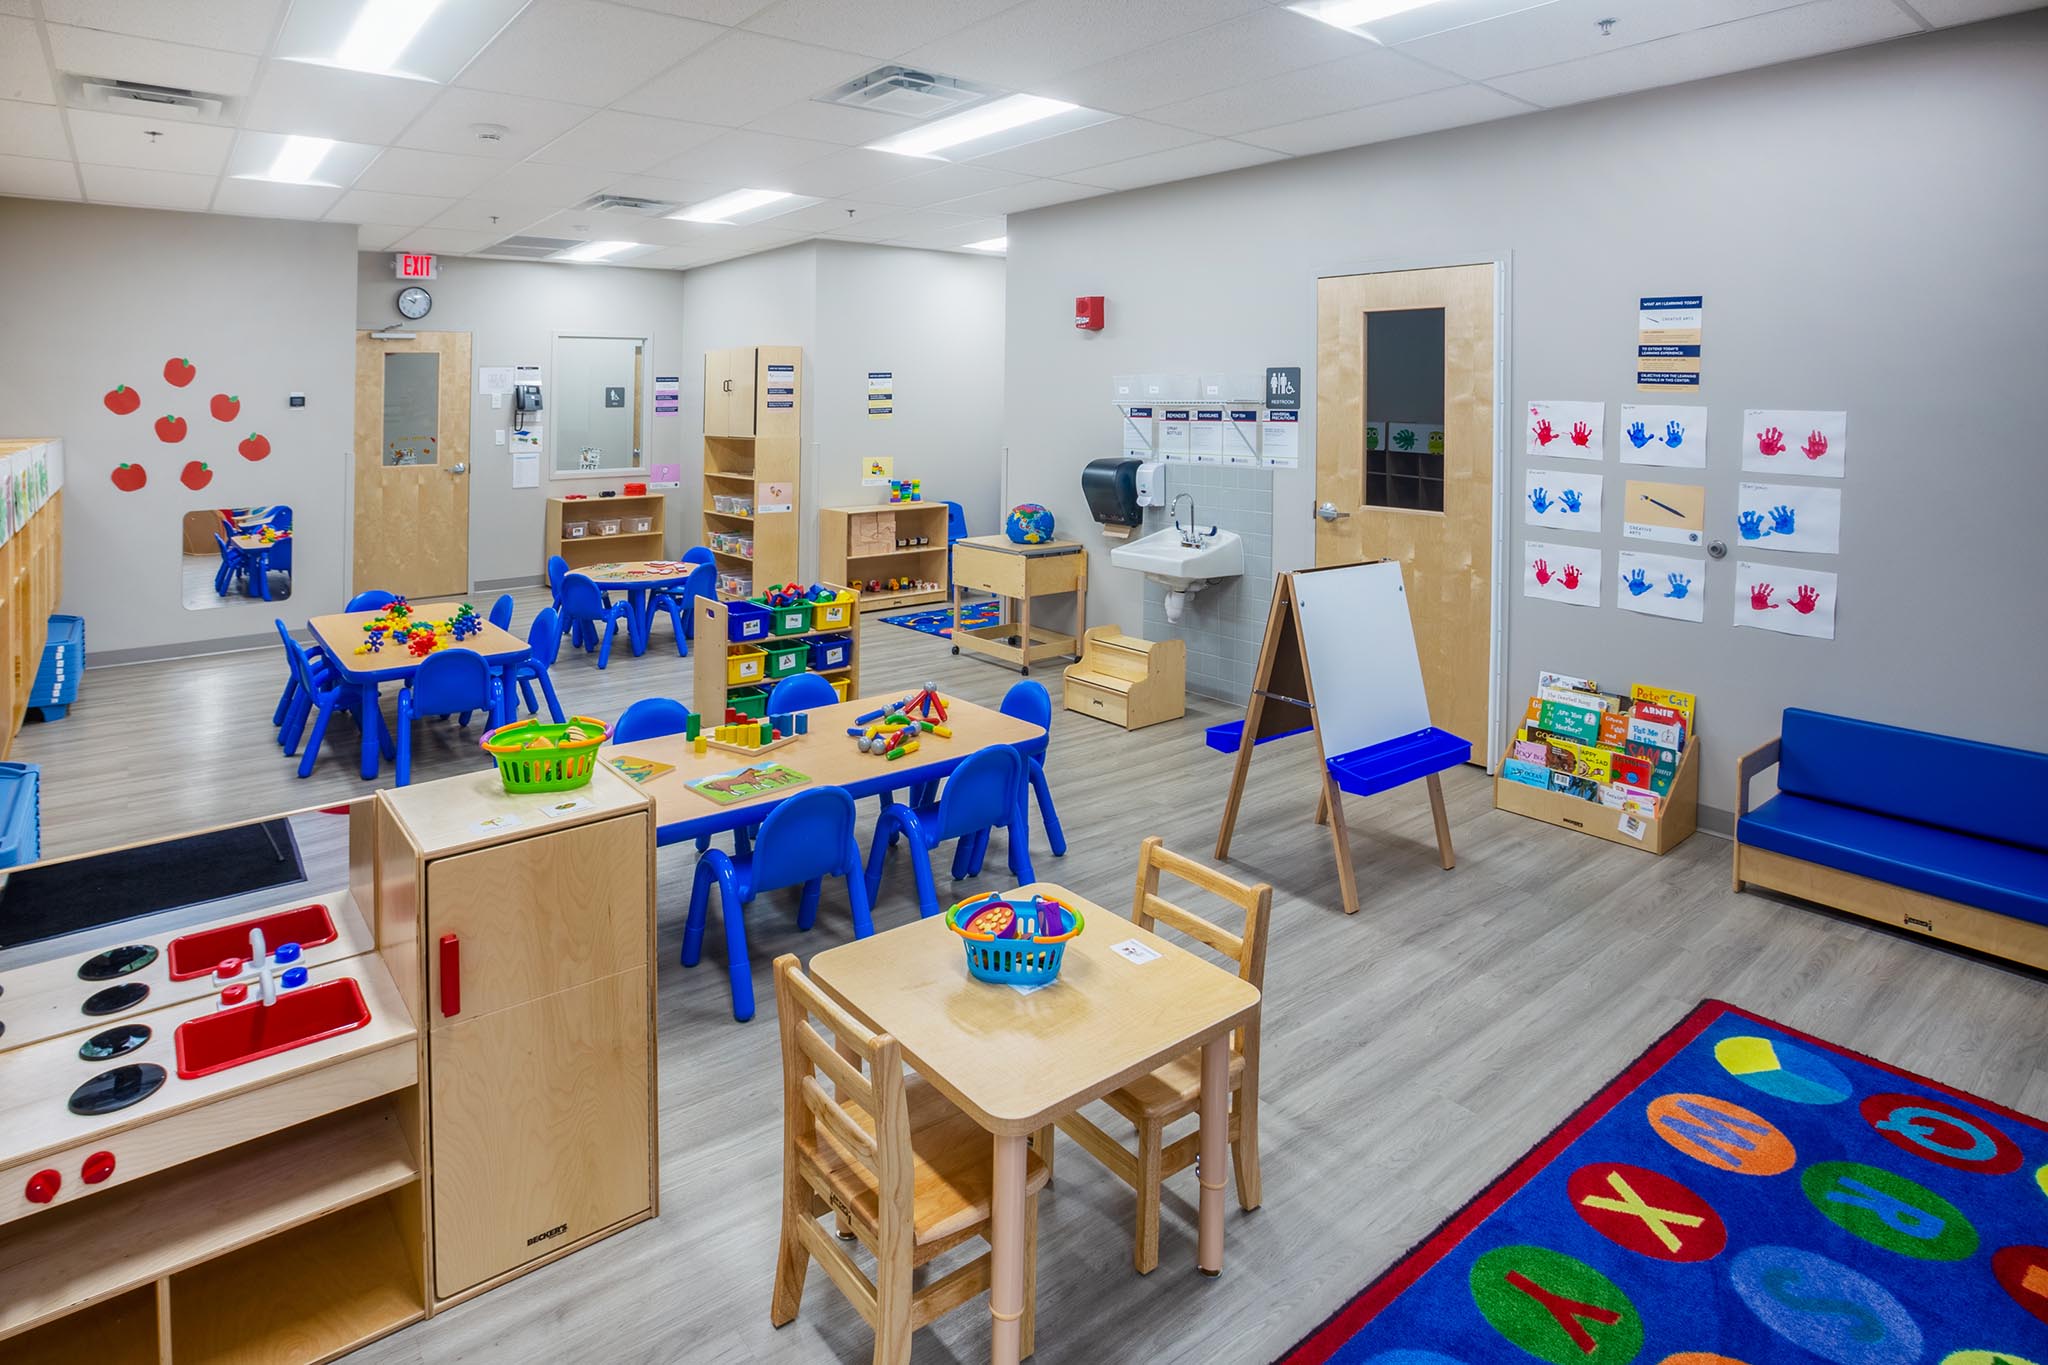 A Goddard School toddler classroom with small blue tables and chairs. Wooden cubbies against the wall, a small wooden play kitchen and a bookshelf with colorful toys.